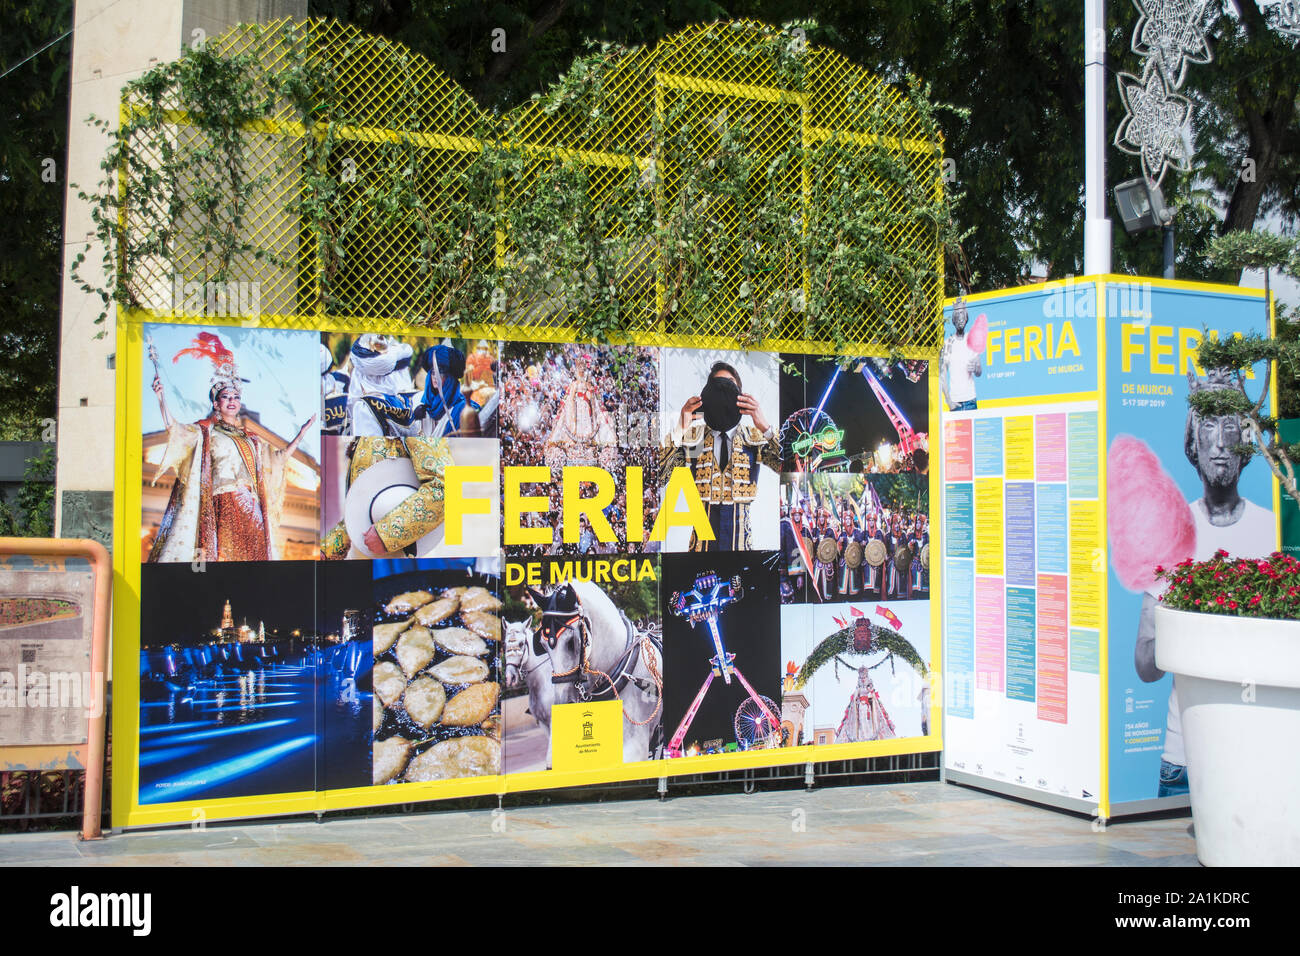 Signage for the Feria in the city of Murcia Spain Stock Photo